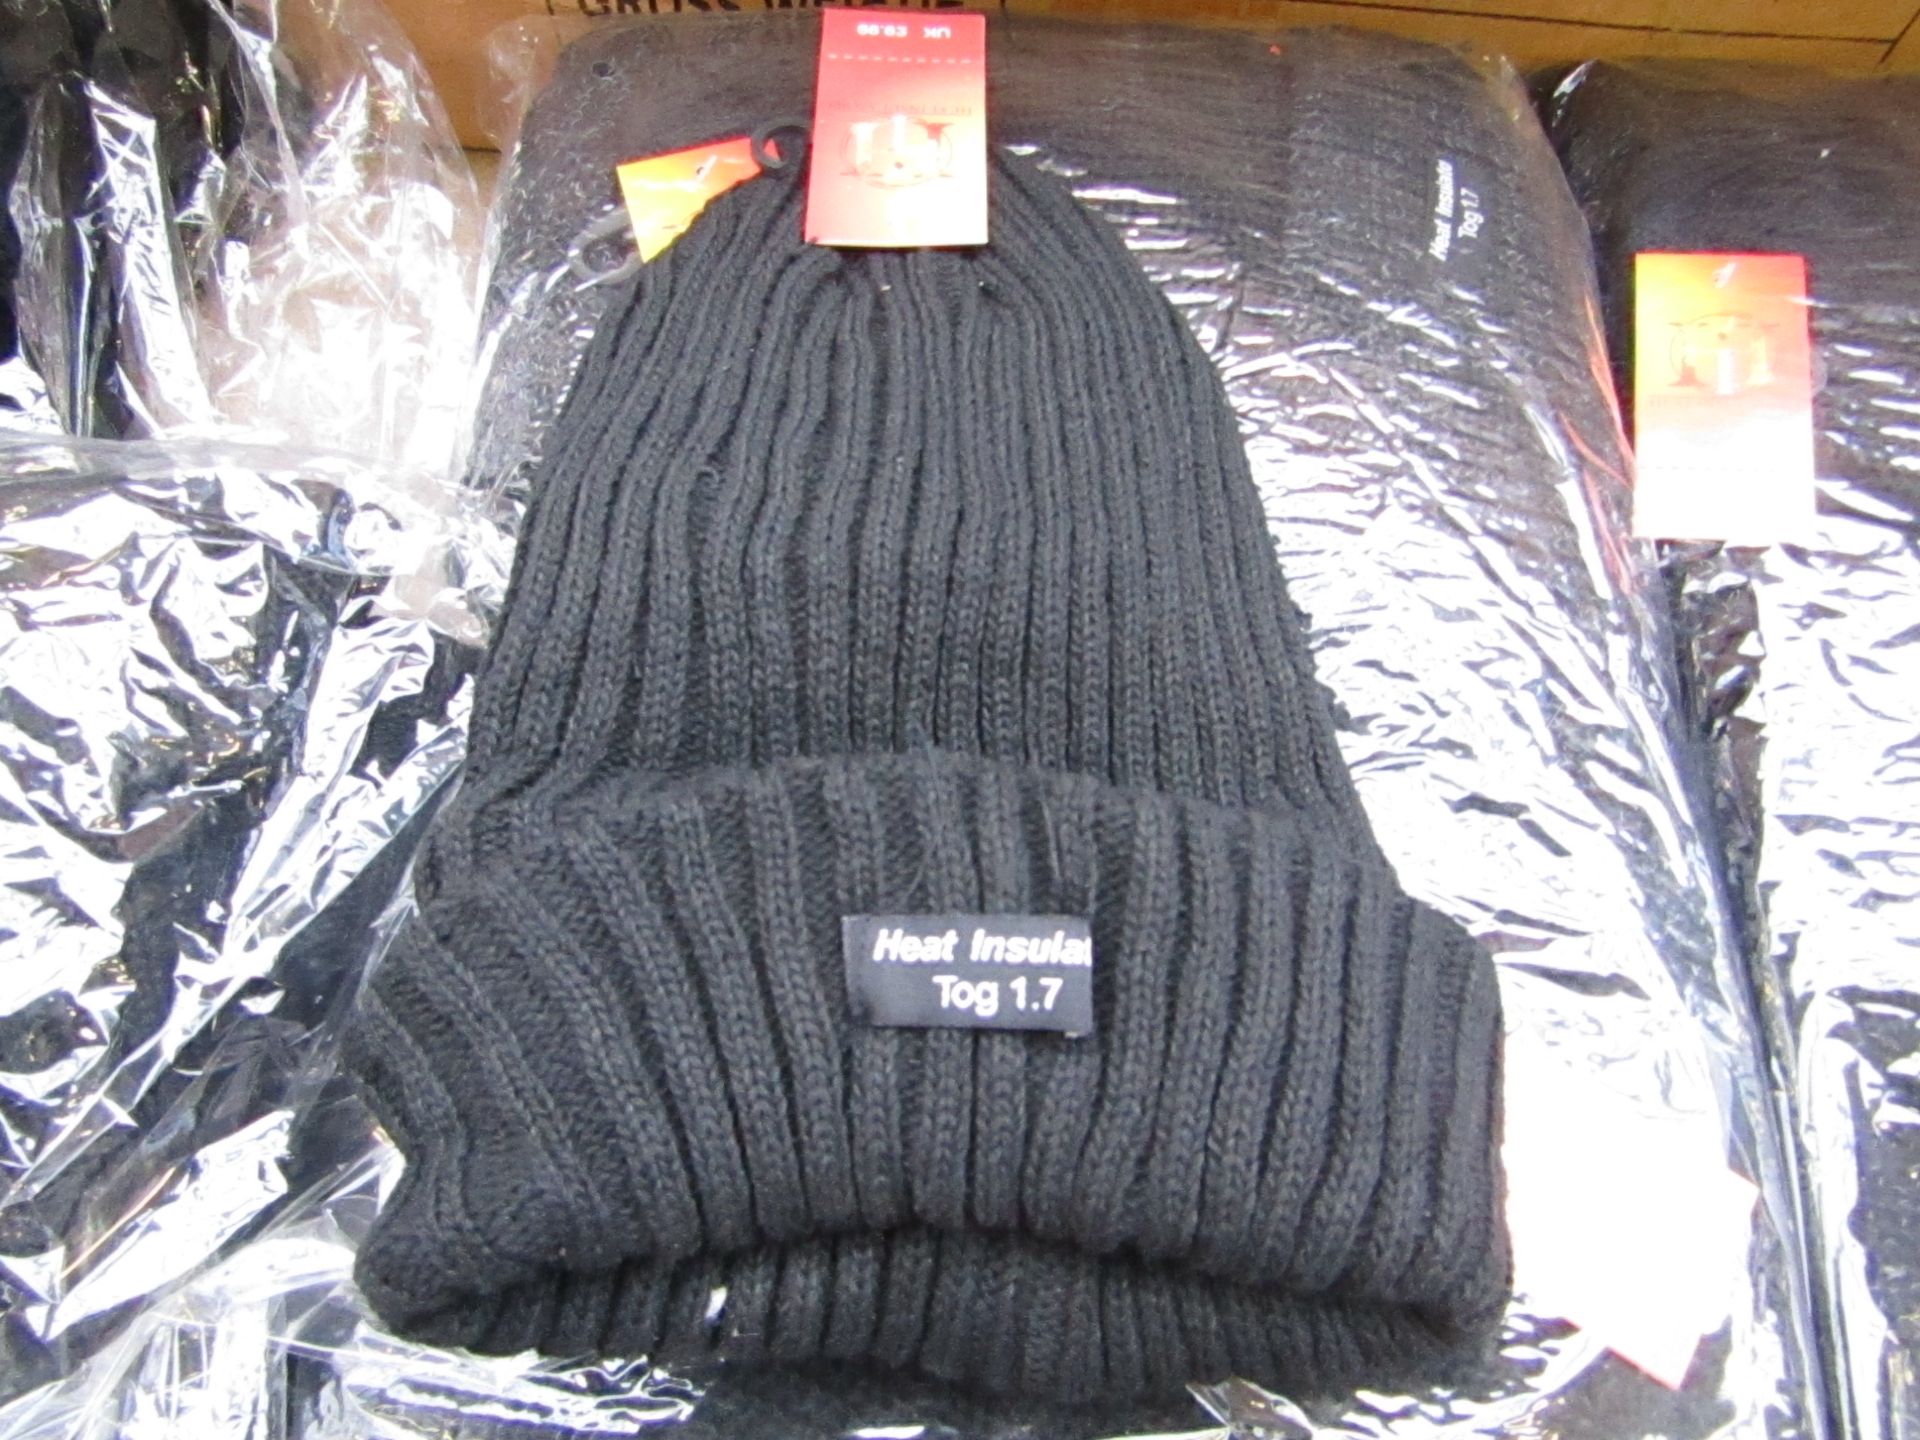 Pack of 12x thermal beanies 1.7 Tog, new and packaged.